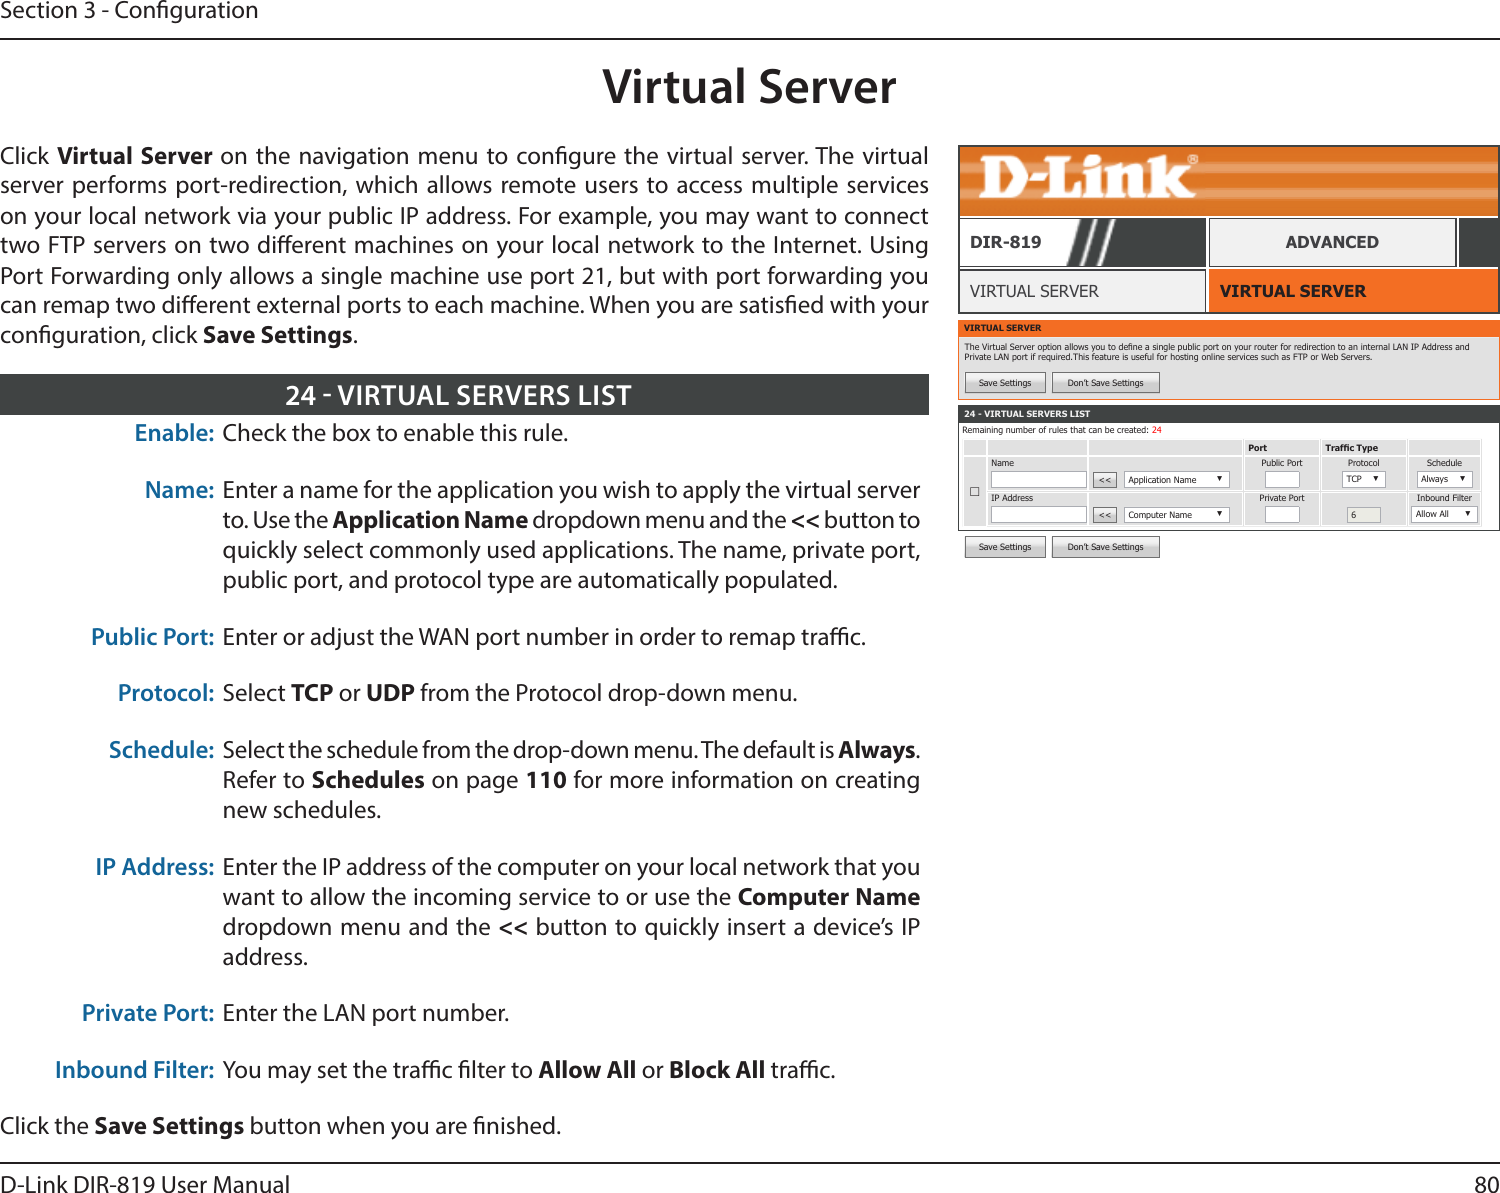 80D-Link DIR-819 User ManualSection 3 - CongurationVirtual ServerVIRTUAL SERVERVIRTUAL SERVERDIR-819 ADVANCEDEnable: Check the box to enable this rule.Name: Enter a name for the application you wish to apply the virtual server to. Use the Application Name dropdown menu and the &lt;&lt; button to quickly select commonly used applications. The name, private port, public port, and protocol type are automatically populated.Public Port: Enter or adjust the WAN port number in order to remap trac.Protocol: Select TCP or UDP from the Protocol drop-down menu.Schedule: Select the schedule from the drop-down menu. The default is Always. Refer to Schedules on page 110 for more information on creating new schedules.IP Address: Enter the IP address of the computer on your local network that you want to allow the incoming service to or use the Computer Name dropdown menu and the &lt;&lt; button to quickly insert a device’s IP address.Private Port: Enter the LAN port number.Inbound Filter: You may set the trac lter to Allow All or Block All trac.Click the Save Settings button when you are nished.24  VIRTUAL SERVERS LISTVIRTUAL SERVERThe Virtual Server option allows you to dene a single public port on your router for redirection to an internal LAN IP Address and Private LAN port if required.This feature is useful for hosting online services such as FTP or Web Servers.Save Settings Don’t Save Settings24 - VIRTUAL SERVERS LISTRemaining number of rules that can be created: 24Port Trafc Type☐Name&lt;&lt;  Application Name ▼Public Port Protocol TCP ▼ScheduleAlways ▼IP Address&lt;&lt;  Computer Name ▼Private Port6Inbound FilterAllow All ▼Save Settings Don’t Save SettingsClick Virtual Server on the navigation menu to congure the virtual server. The virtual server performs port-redirection, which allows remote users to access multiple services on your local network via your public IP address. For example, you may want to connect two FTP servers on two dierent machines on your local network to the Internet. Using Port Forwarding only allows a single machine use port 21, but with port forwarding you can remap two dierent external ports to each machine. When you are satised with your conguration, click Save Settings.